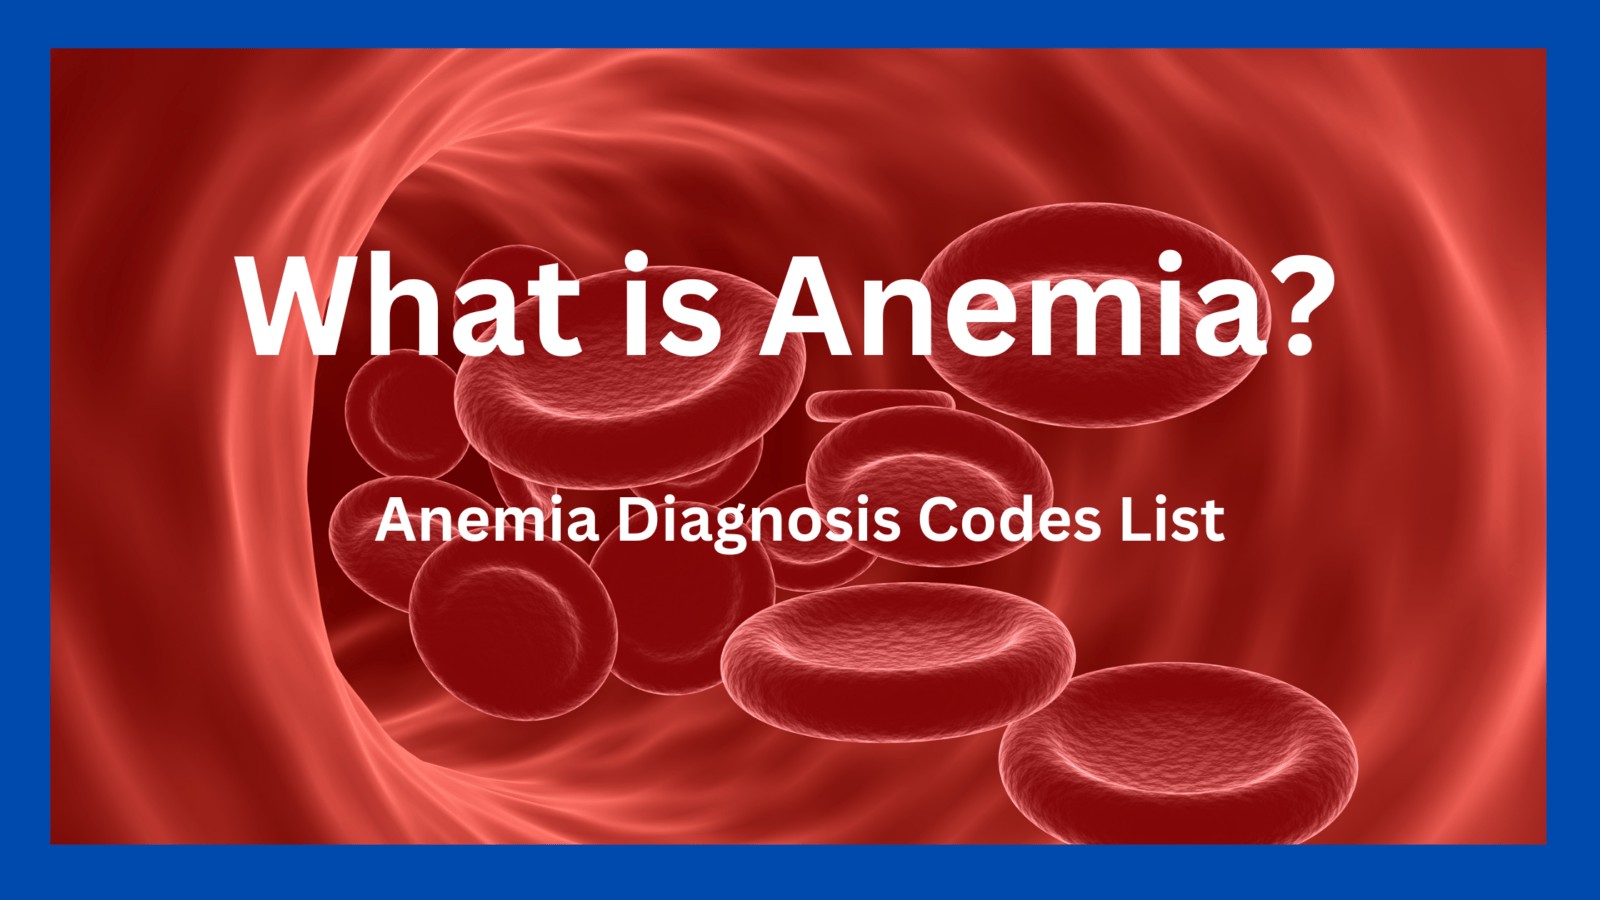 ICD 10 codes for Anemia